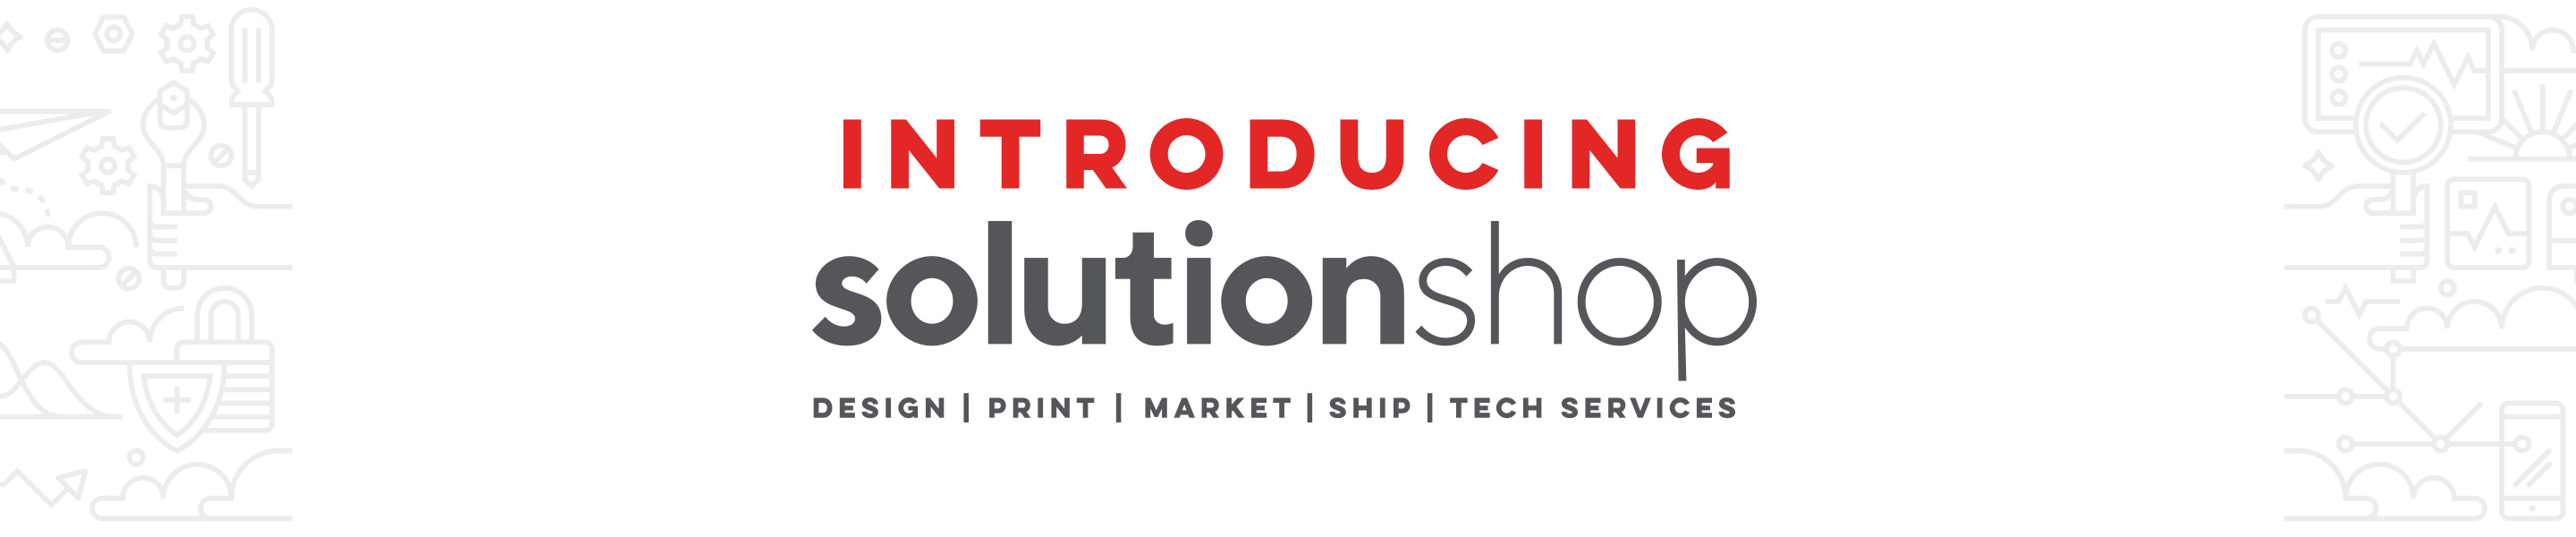 Introducing Solutionshop